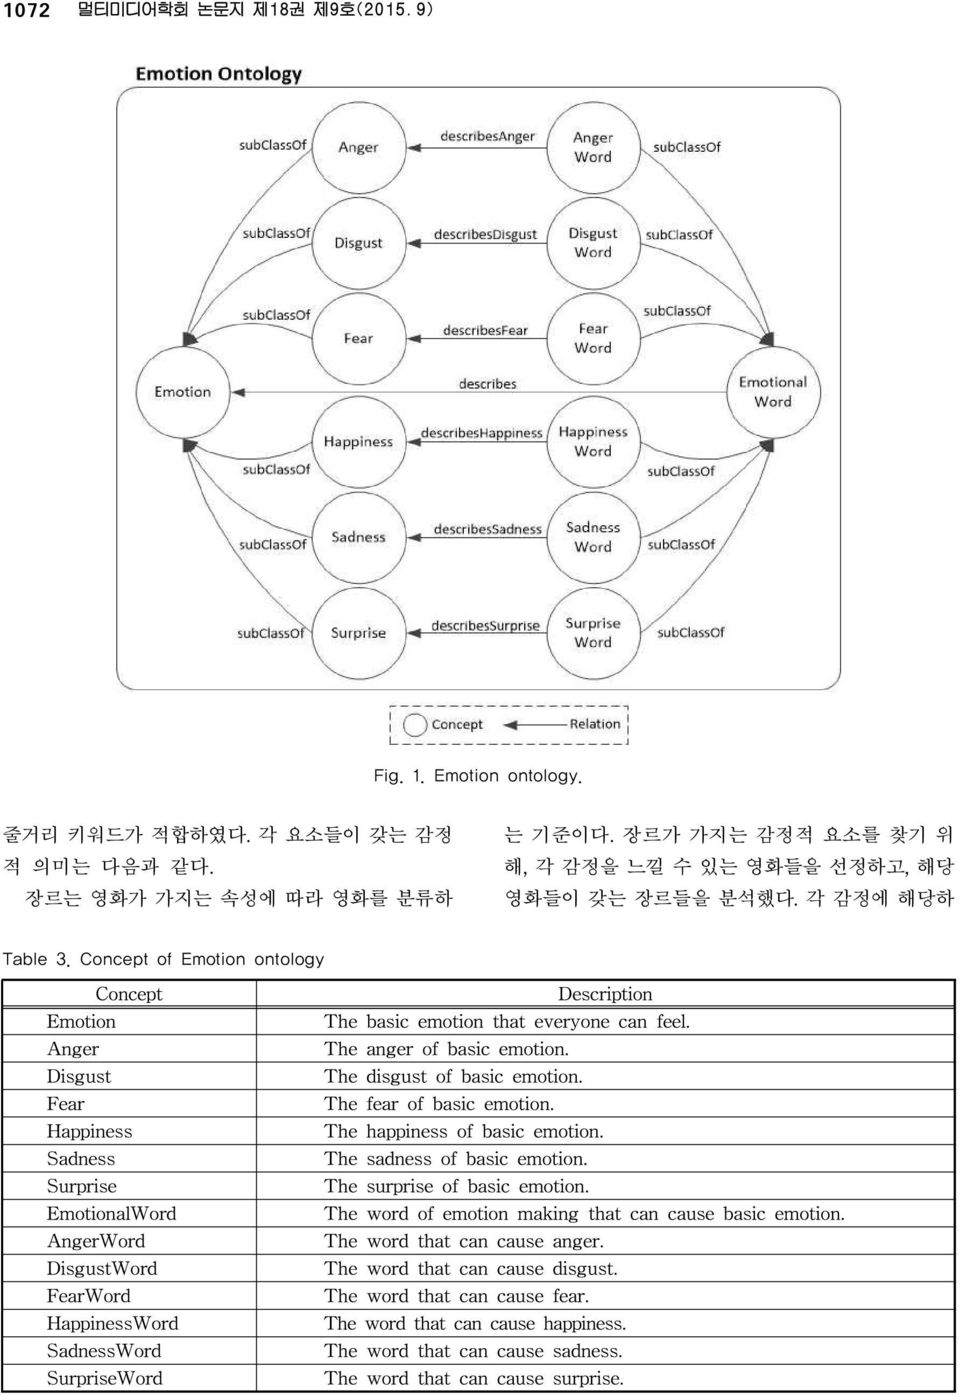 Concept of Emotion ontology Concept Emotion Anger Disgust Fear Happiness Sadness Surprise EmotionalWord AngerWord DisgustWord FearWord HappinessWord SadnessWord SurpriseWord Description The basic